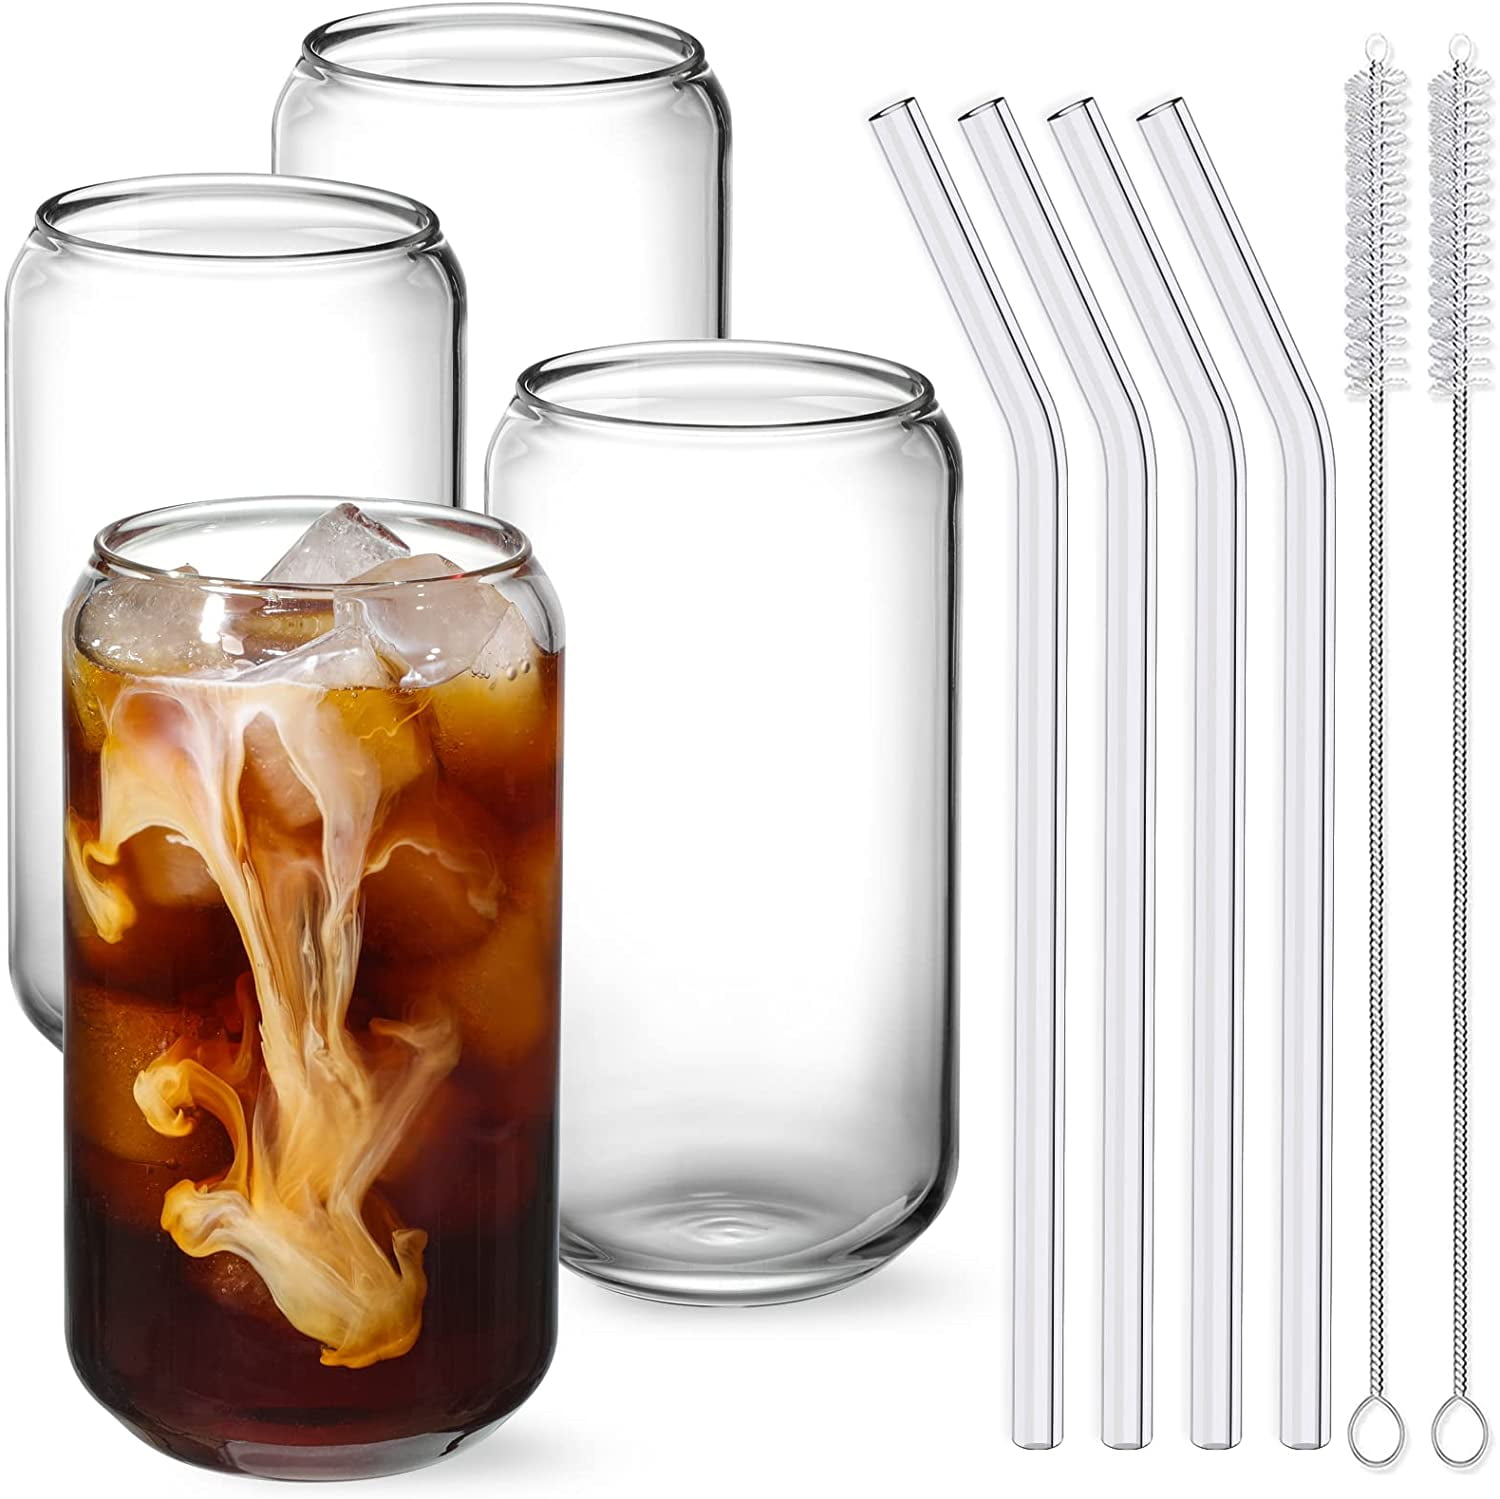  Marksle Home Glass Cups With Lids And Straws - 16oz Iced Coffee  Cup 4pcs Set - Glass Iced Coffee Cups with Lids – Glass Tumbler with Straw  and Lid - Glass